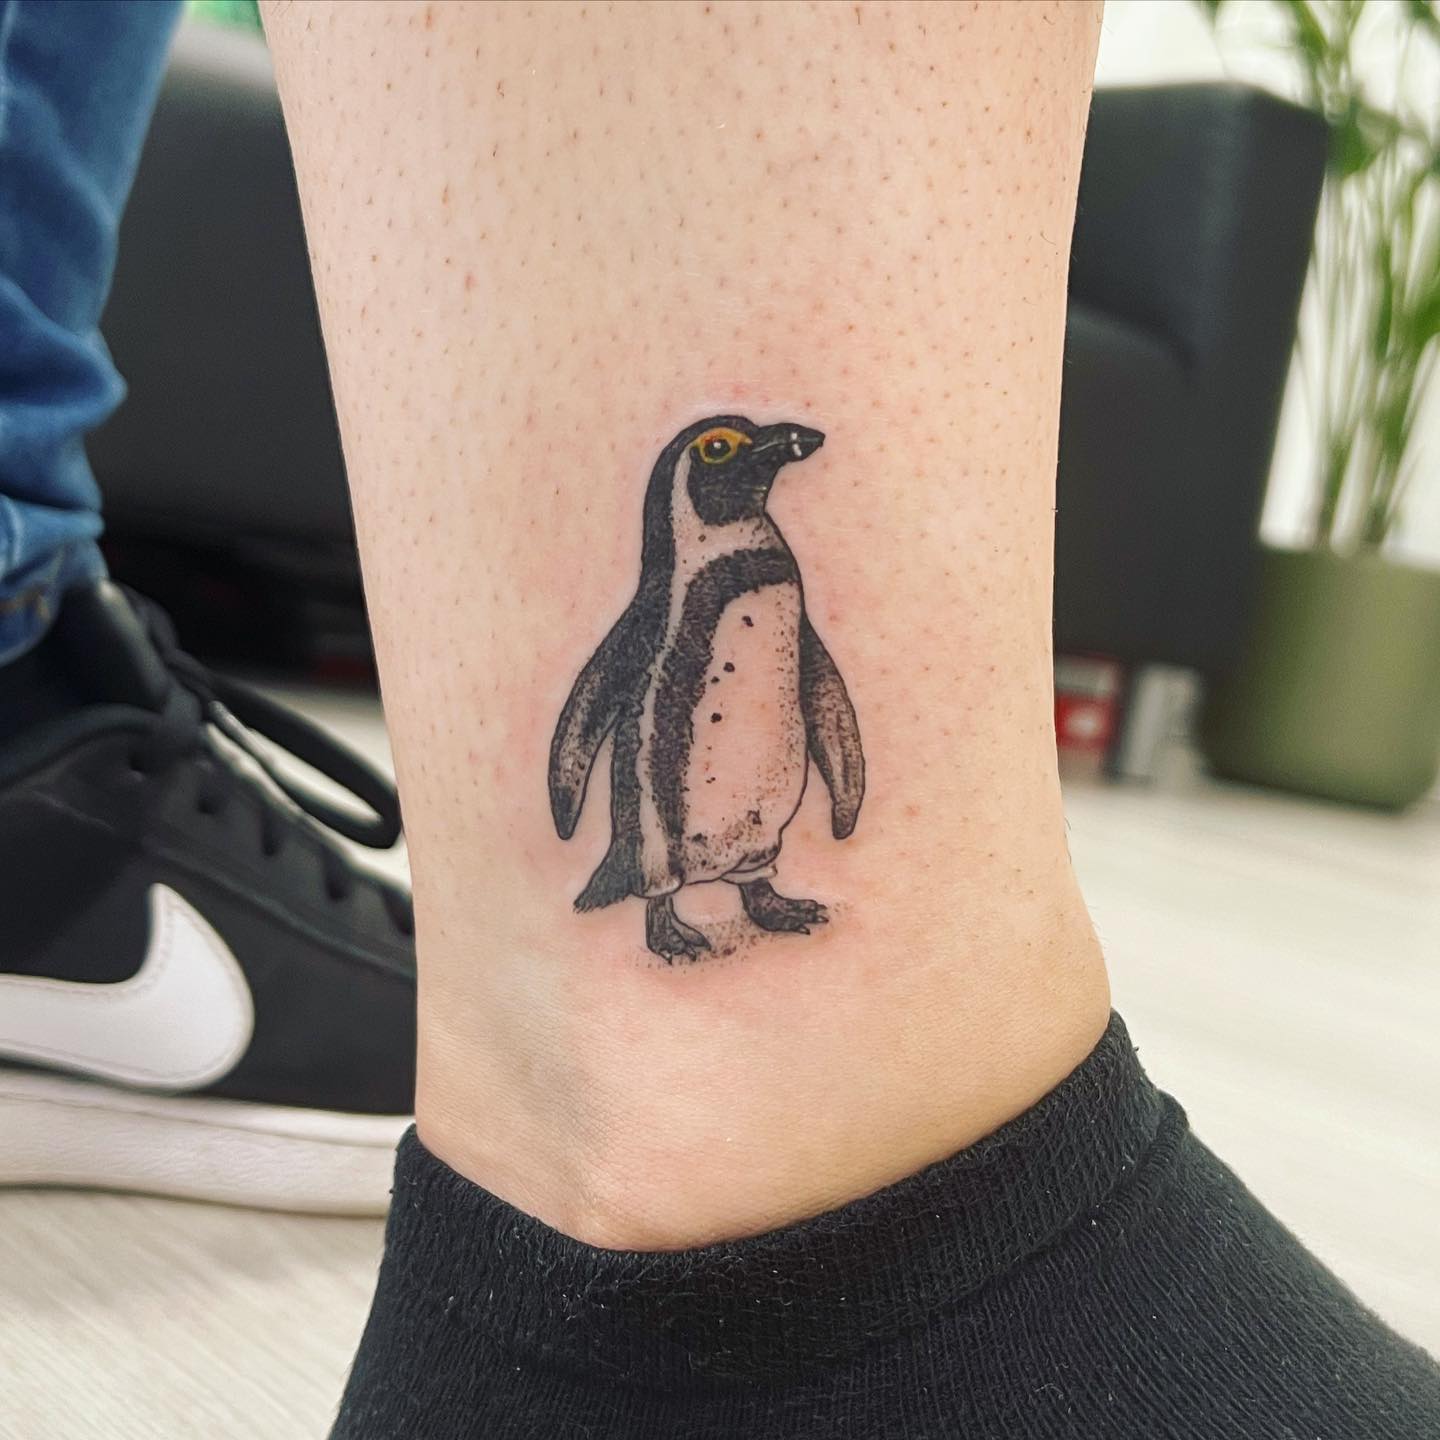 Sometimes it is really interesting to see how realistic some tattoos are. This realistic and shady penguin tattoo is ready to make you shine.